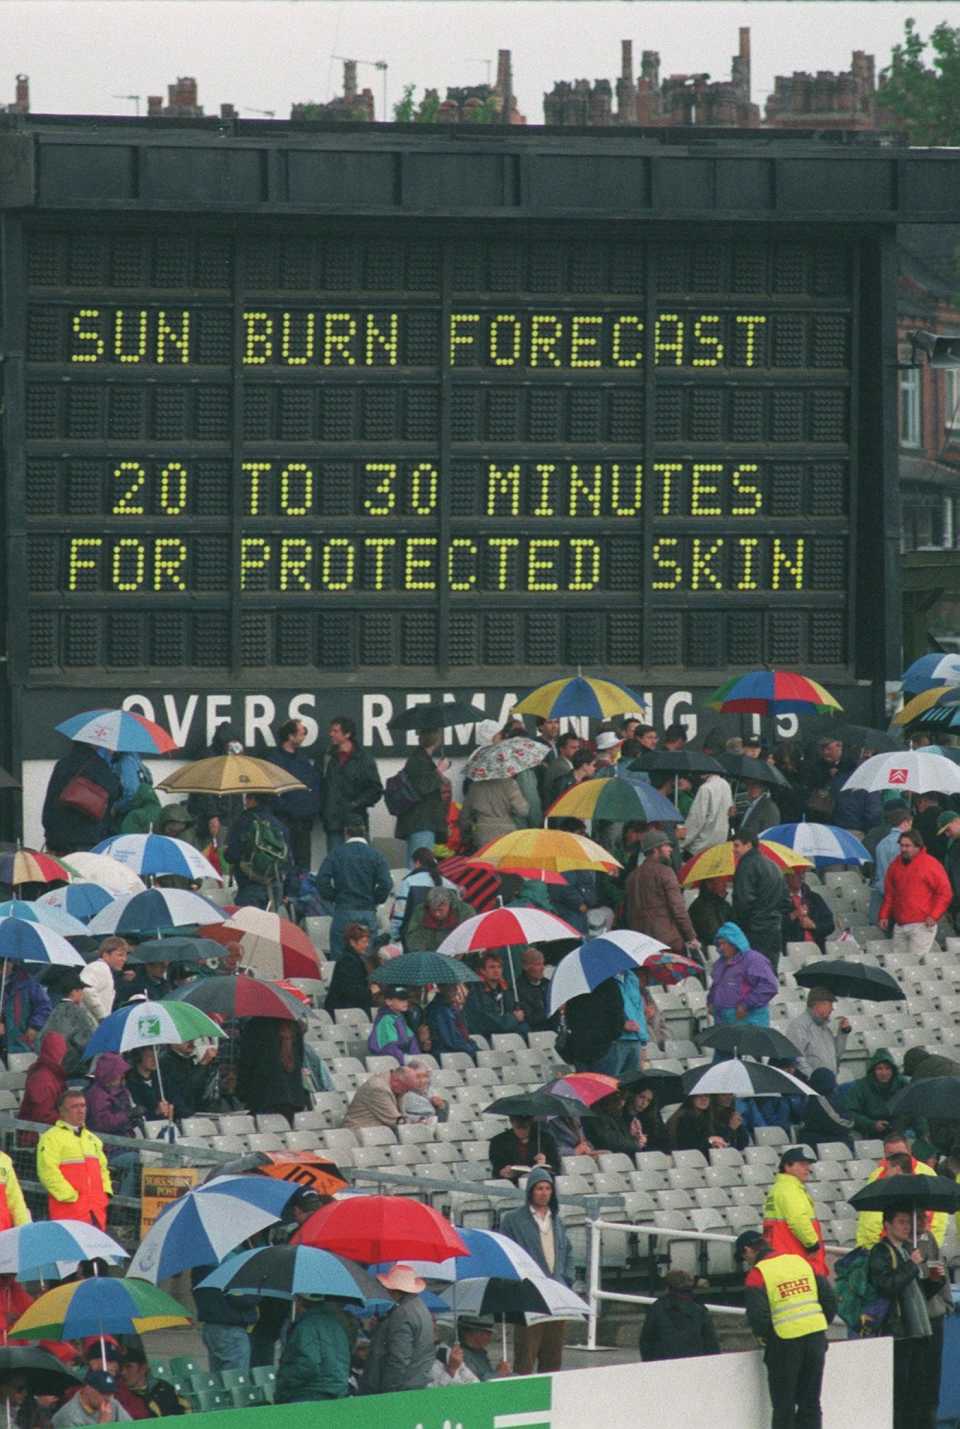 The scoreboard at Headingley continues to warn against sunburn, even though rain has stopped play